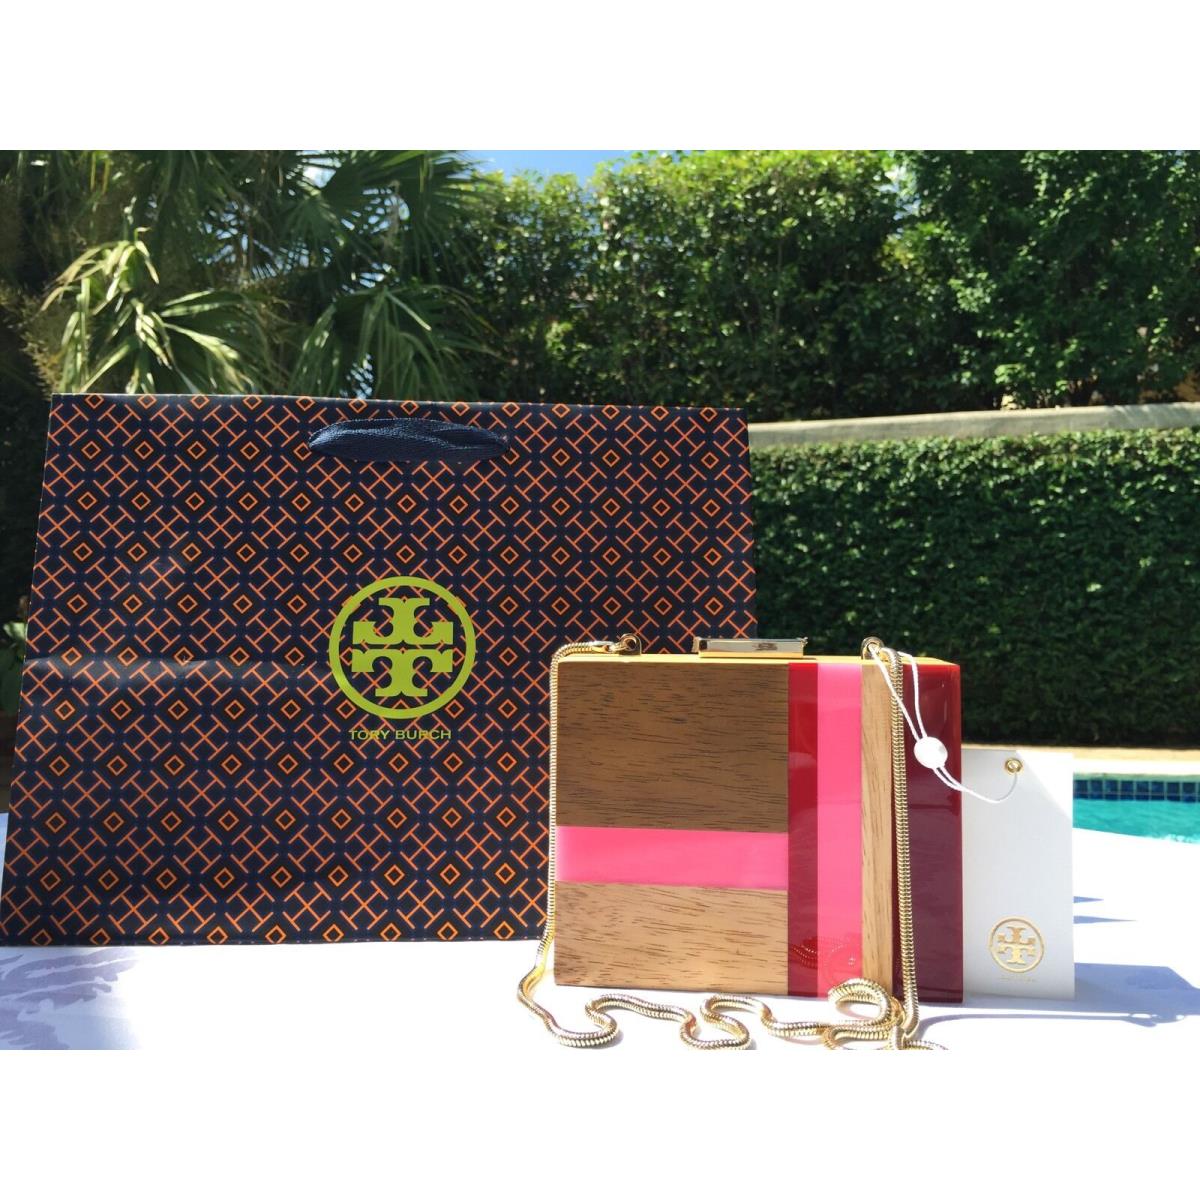 Tory Burch Color Cube Minaudiere Clutch Pink Multi Gift Bag